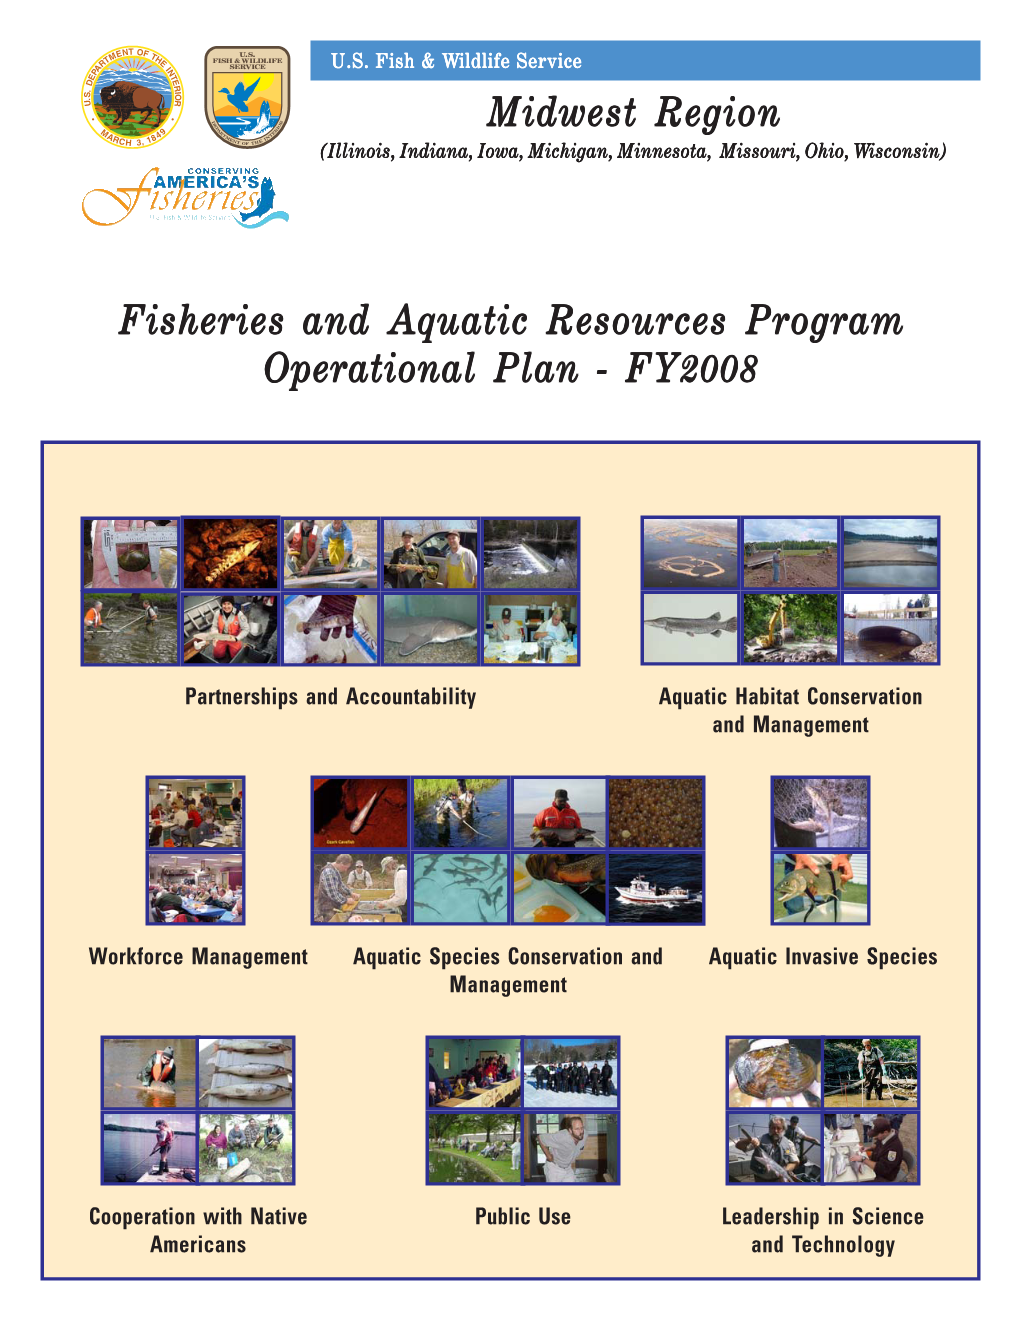 Midwest Region Fisheries and Aquatic Resources Program Operational Plan